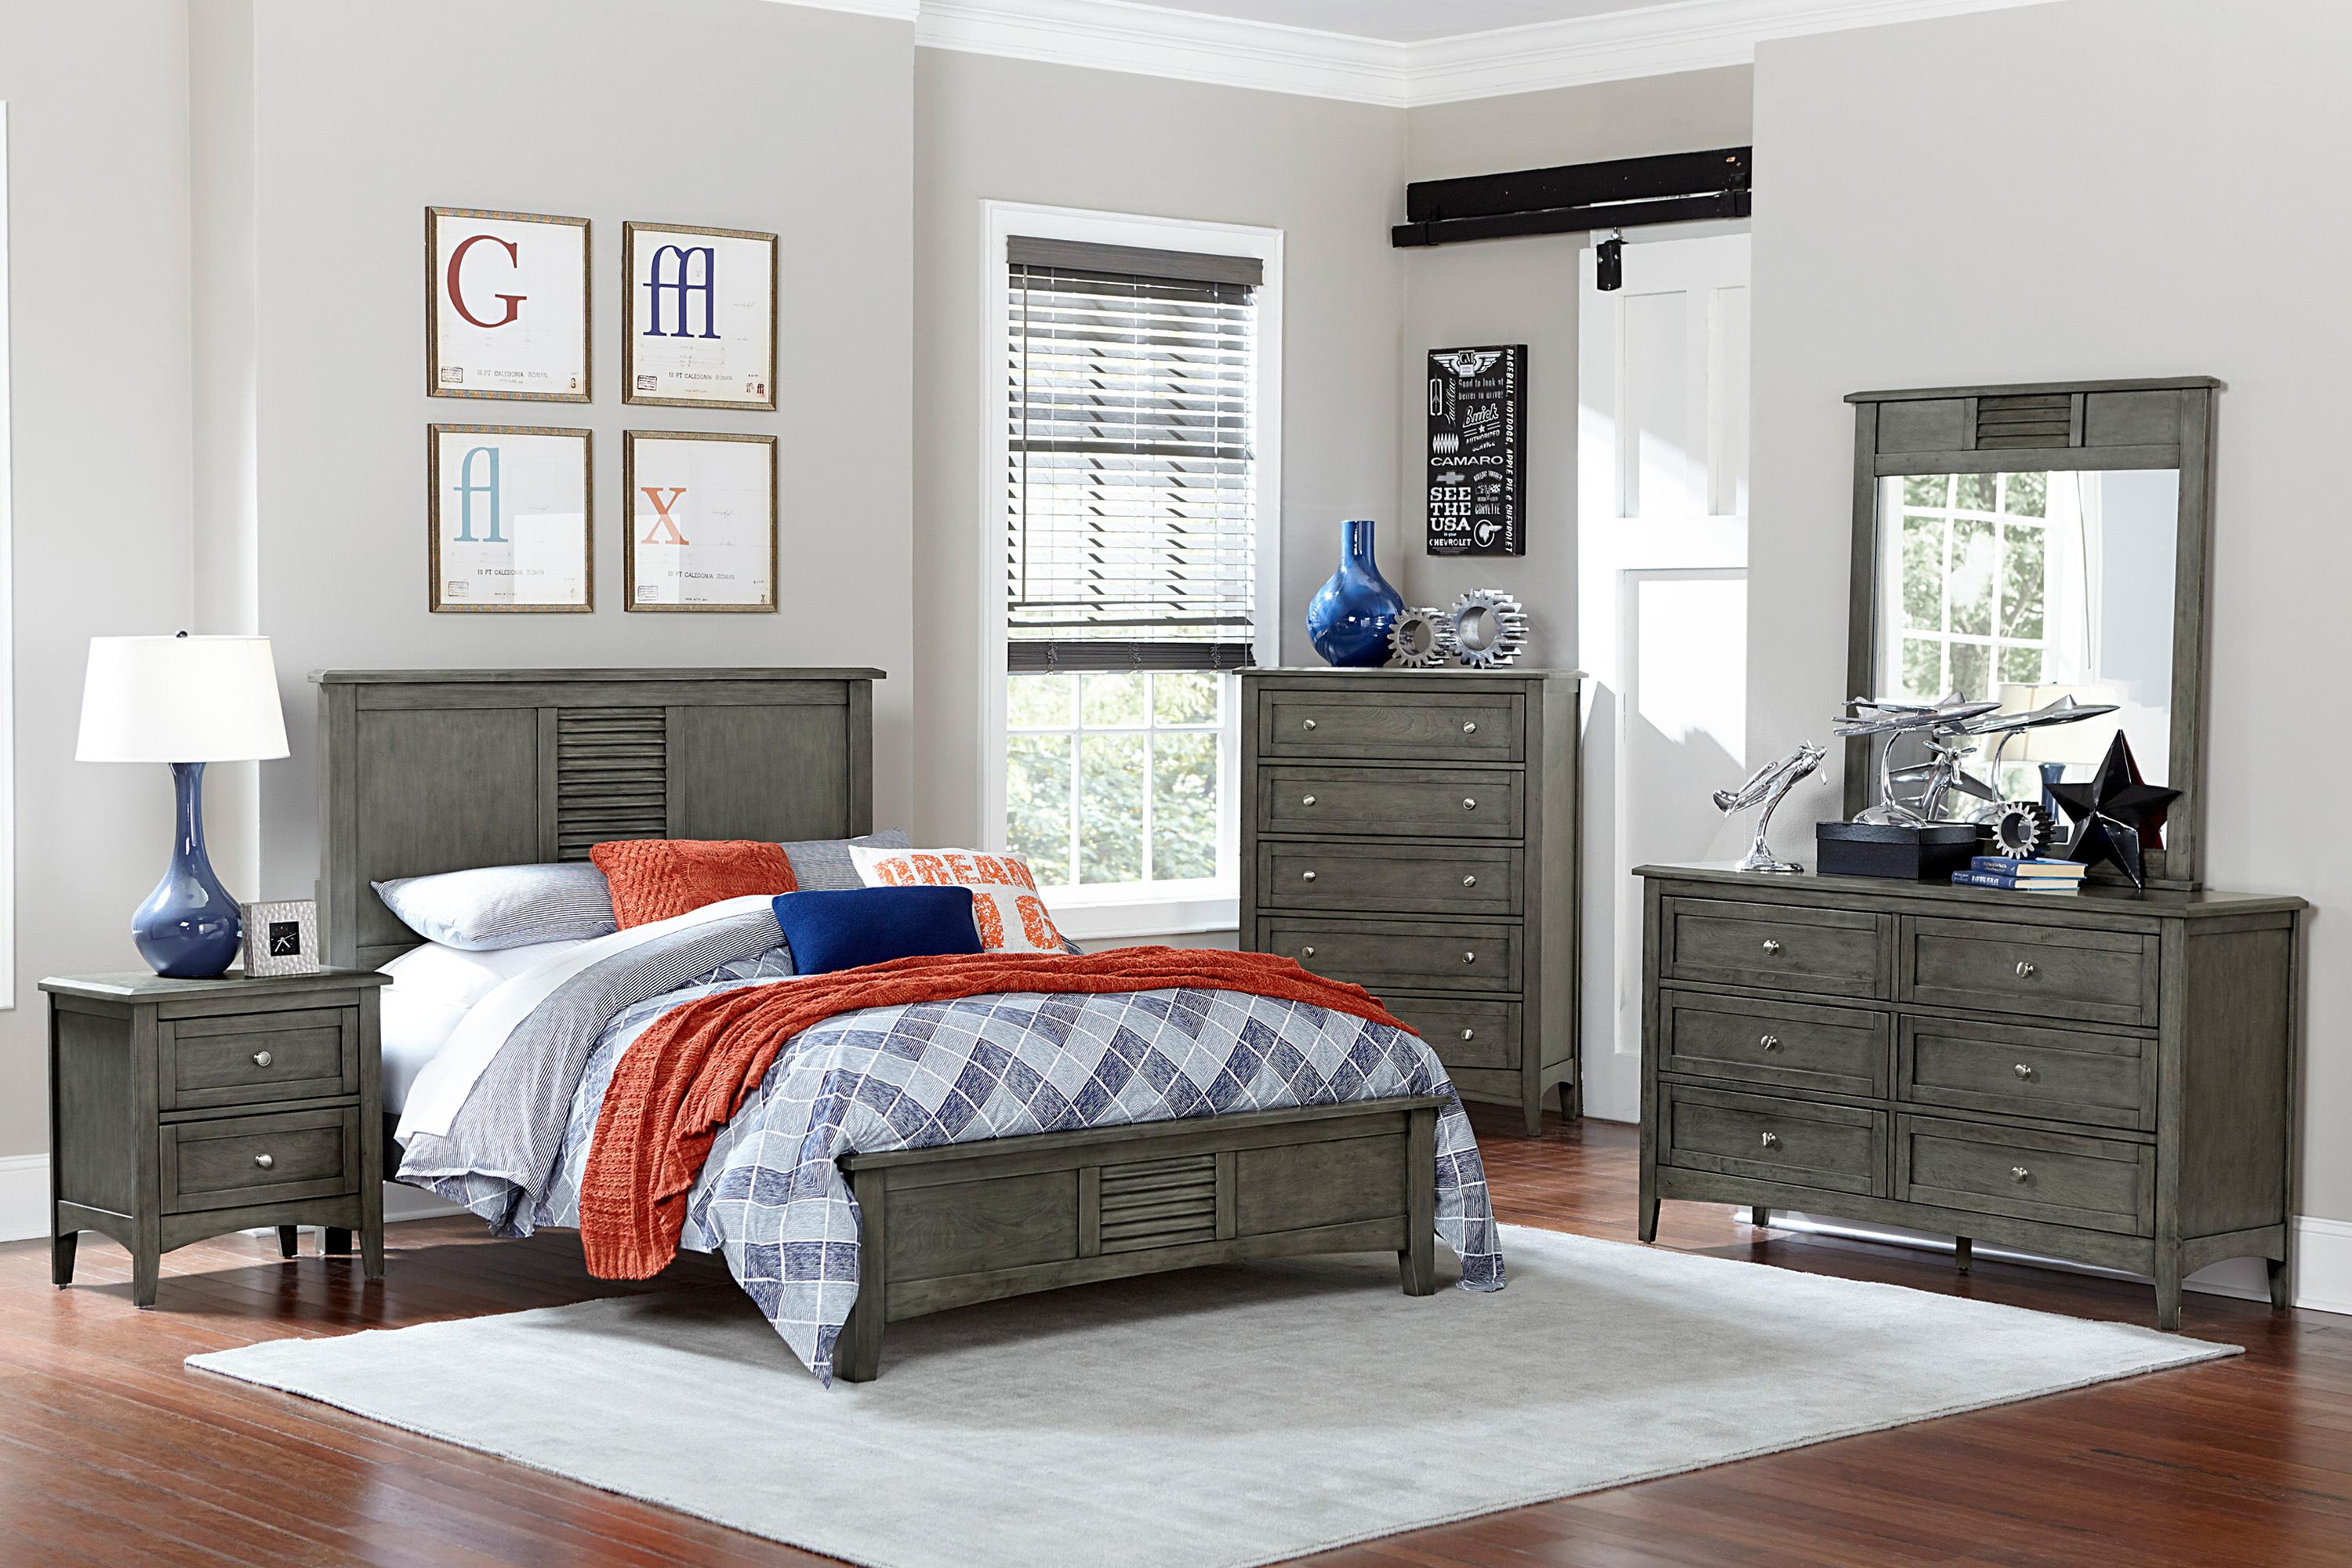 Transitional Bedroom Set 2046-1-6PC Garcia 2046-1-6PC in Gray 